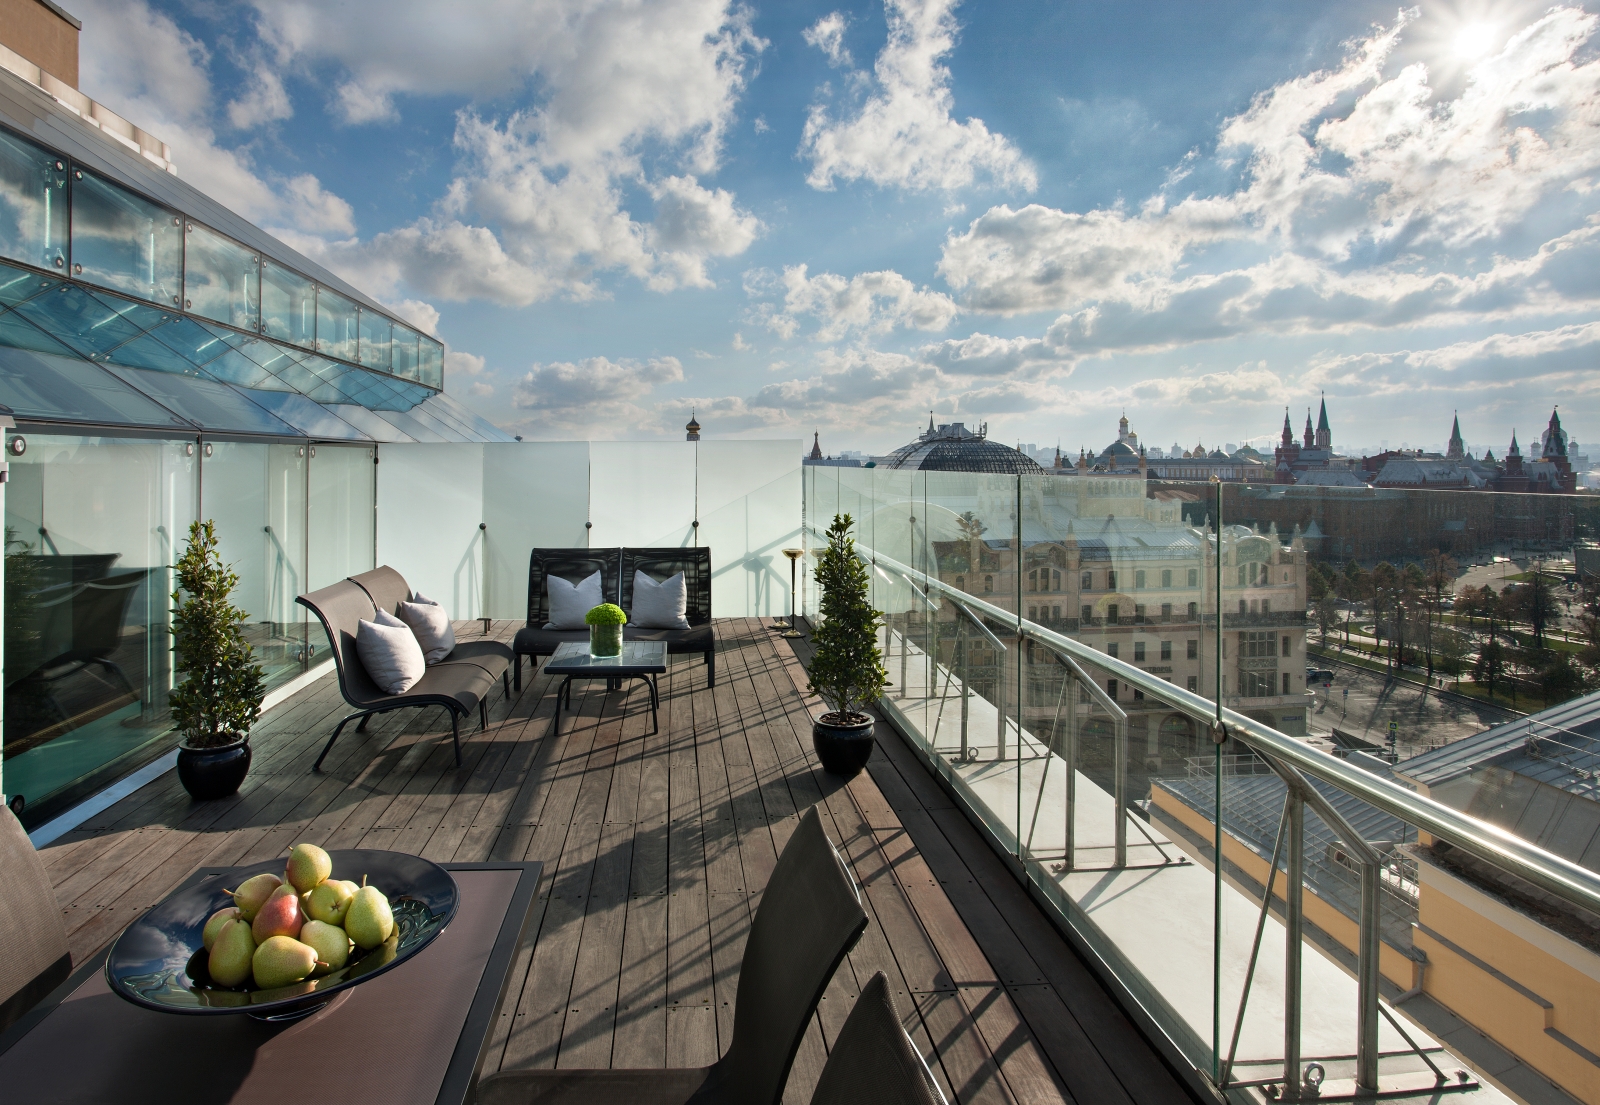 Suite terrace at Ararat Park Hyatt with seating and beautiful views of the city